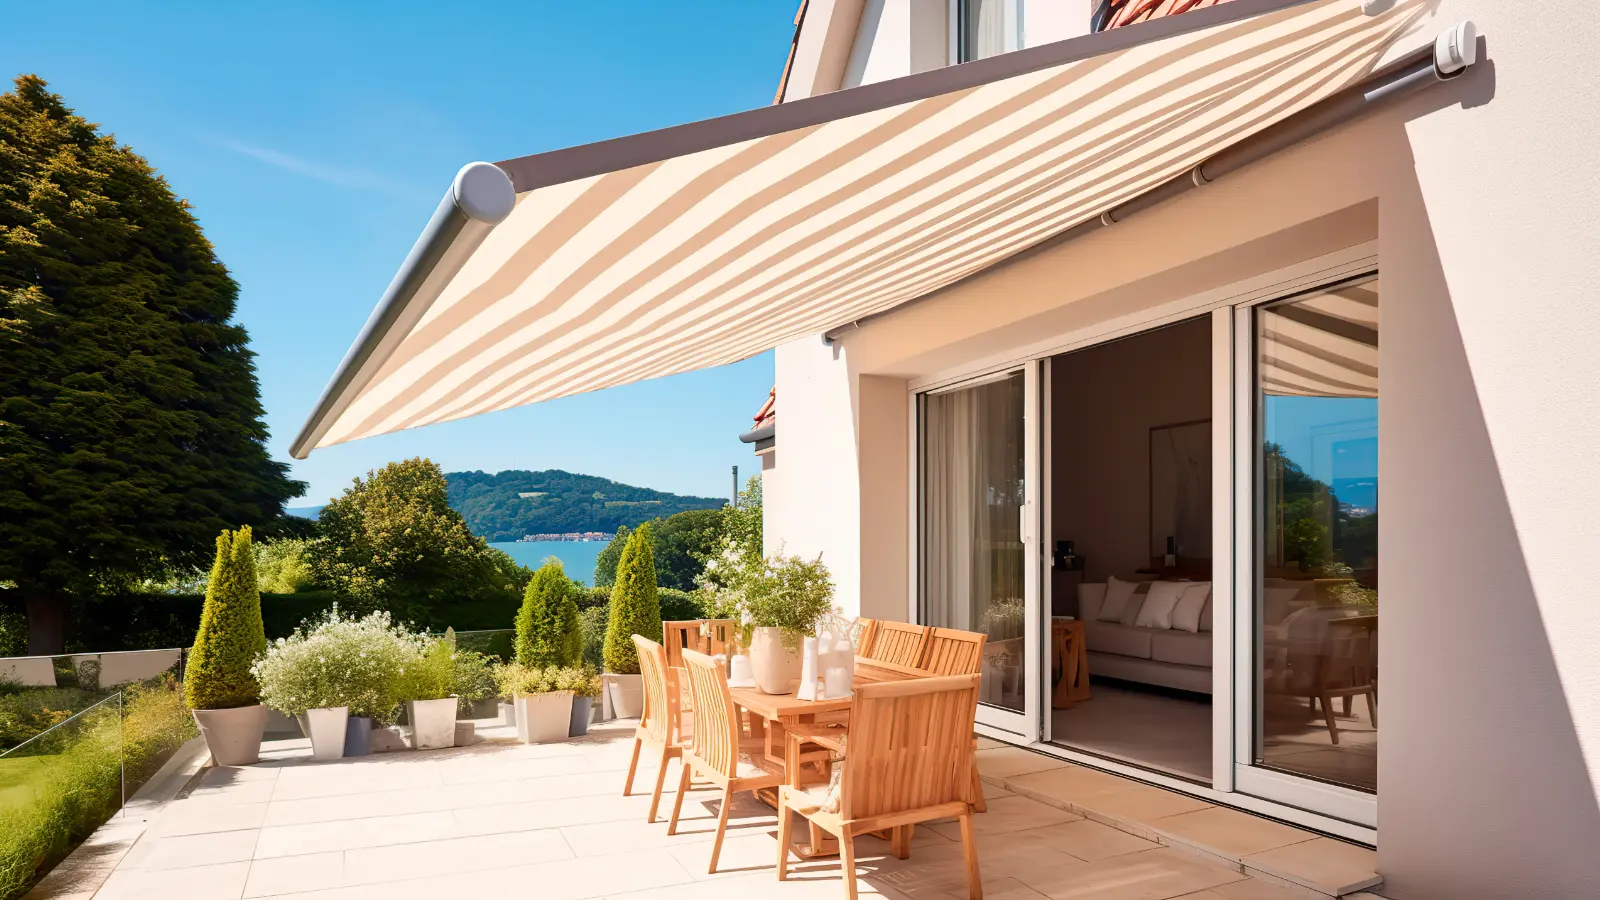 An awning on a patio with a view of a lake.